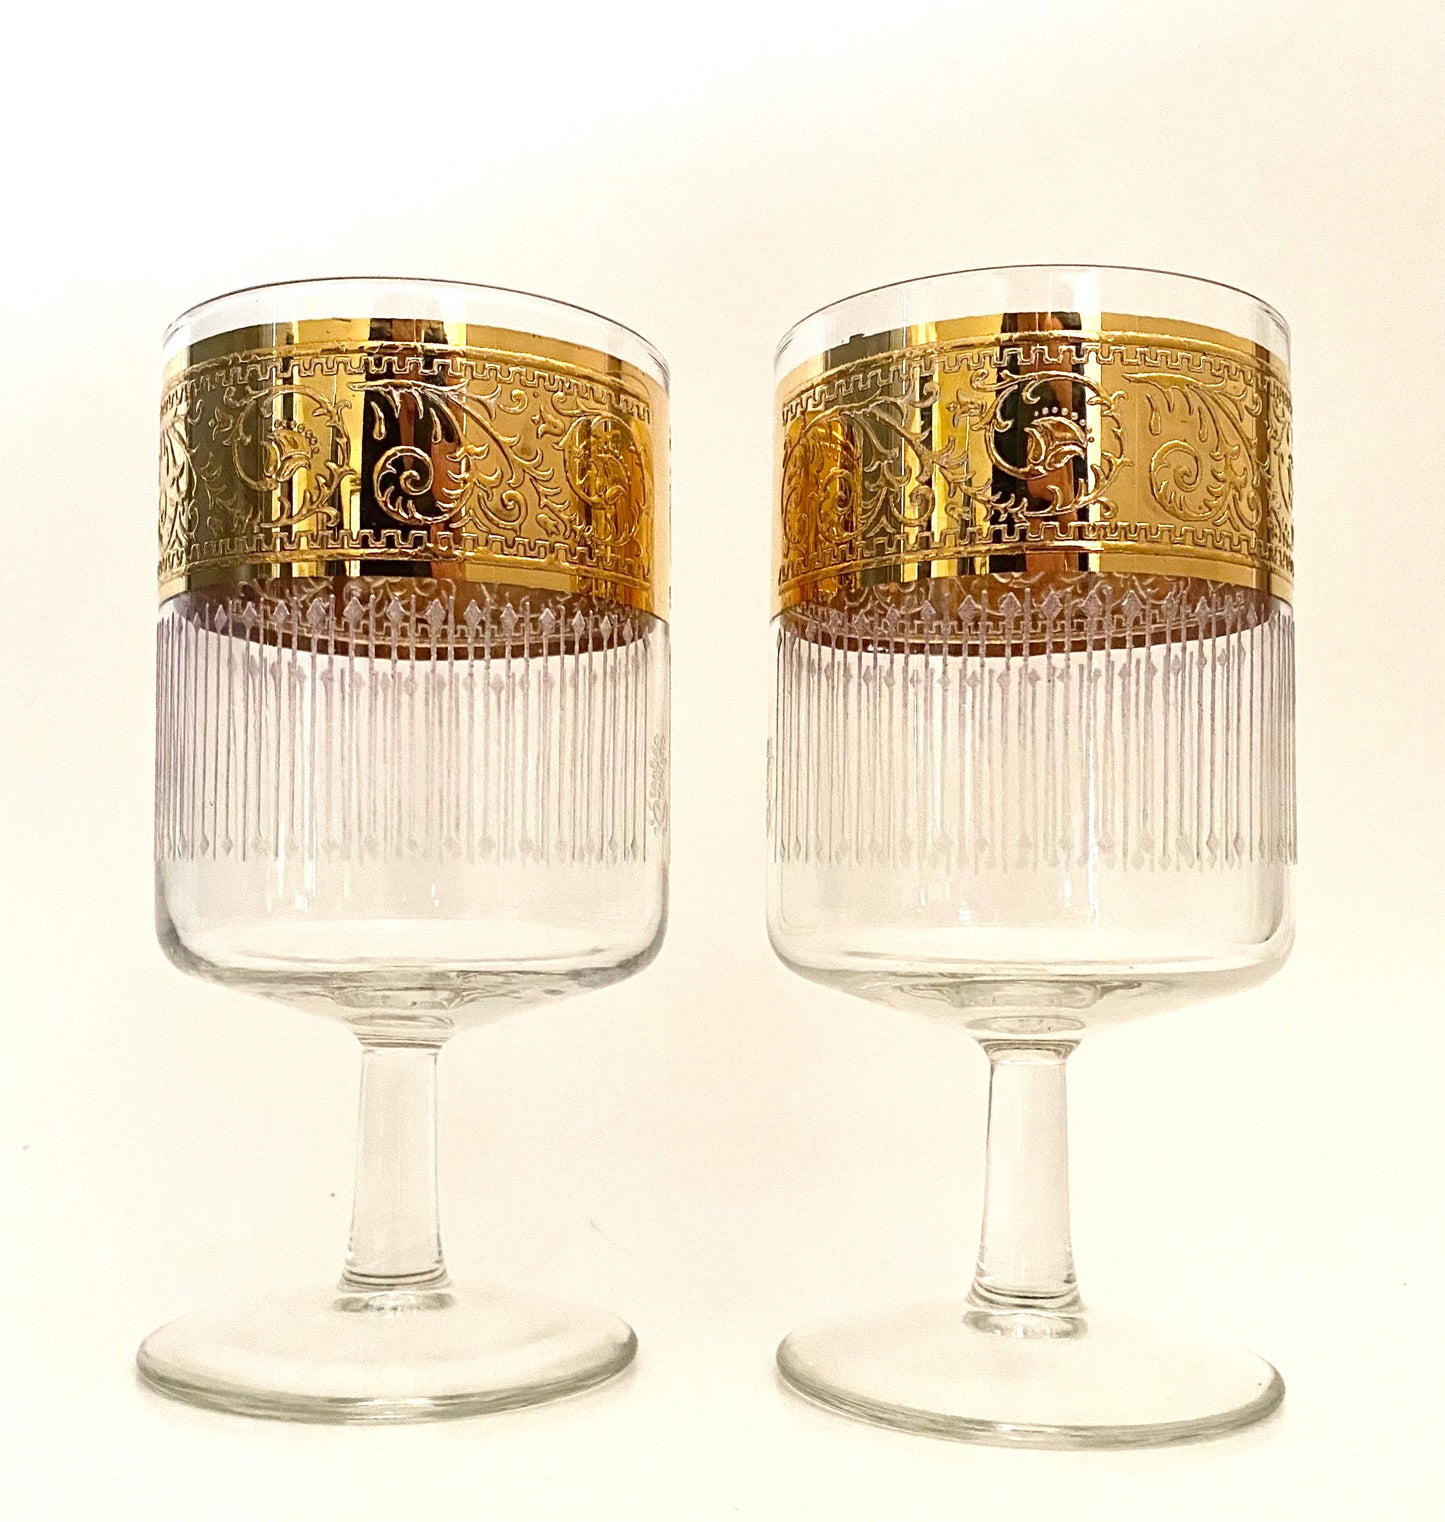 Starlyte Tiffany Stemmed Glass (Pair) 2 Available